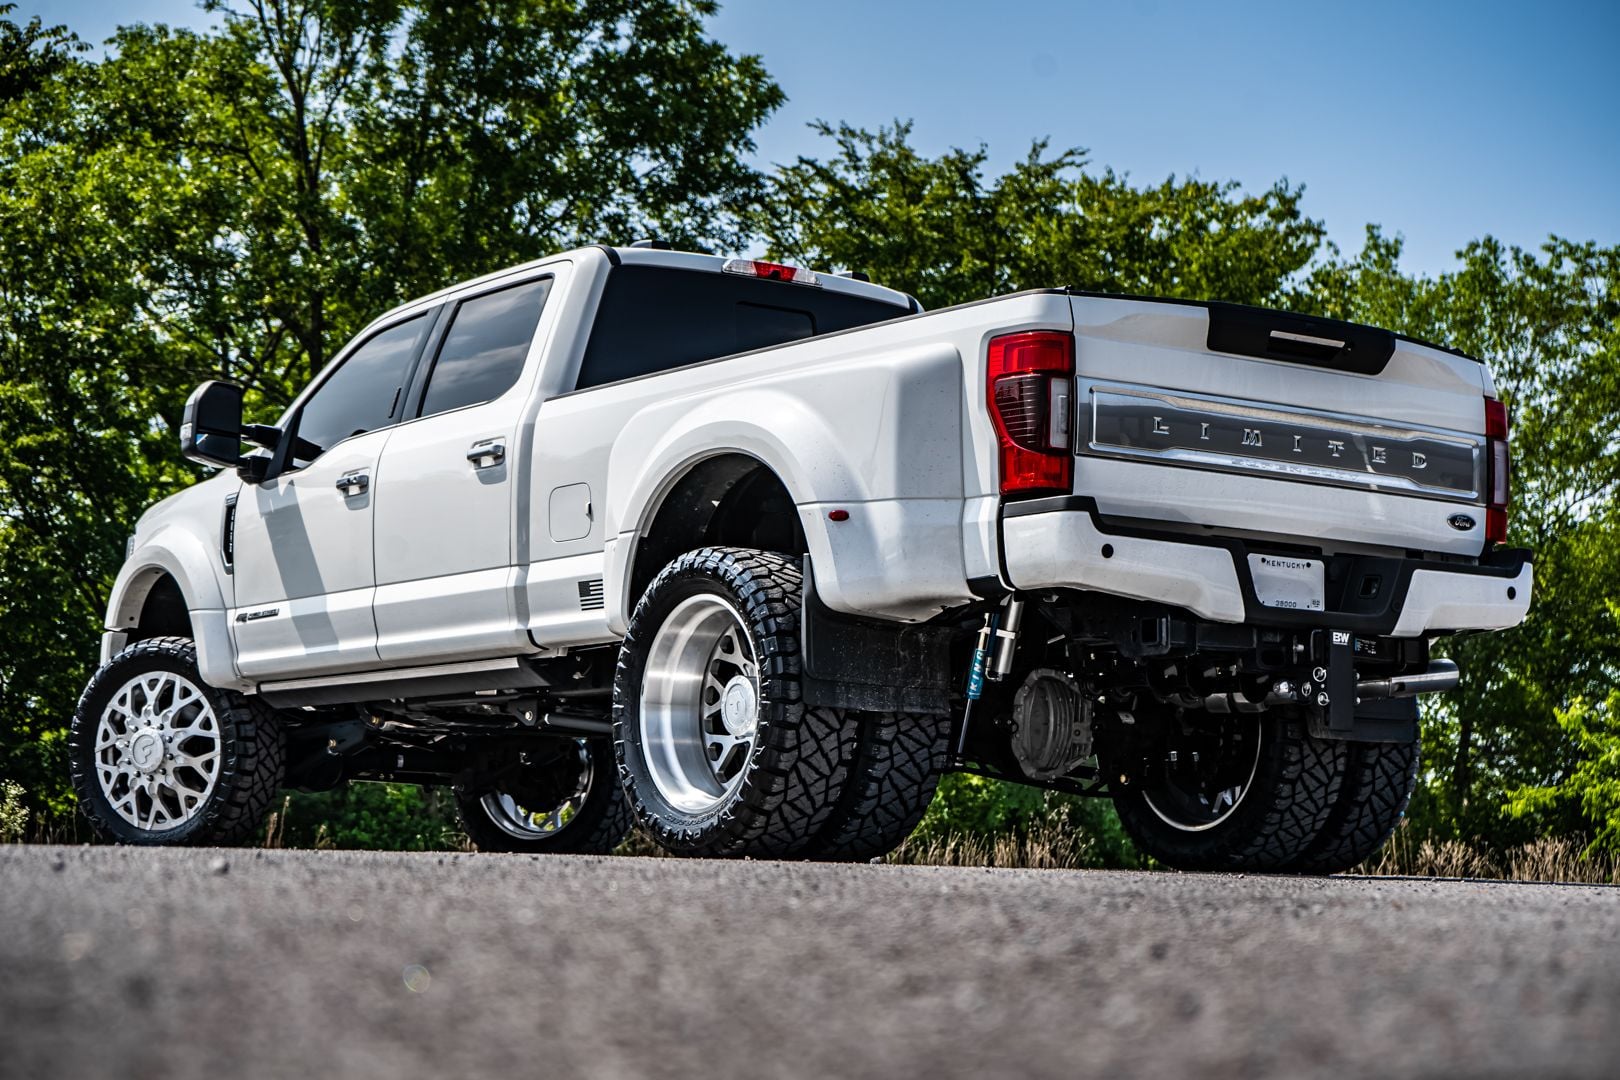 2020 F450 Limited on 24" Wheels w/ PMF 4" Lift Ford Truck